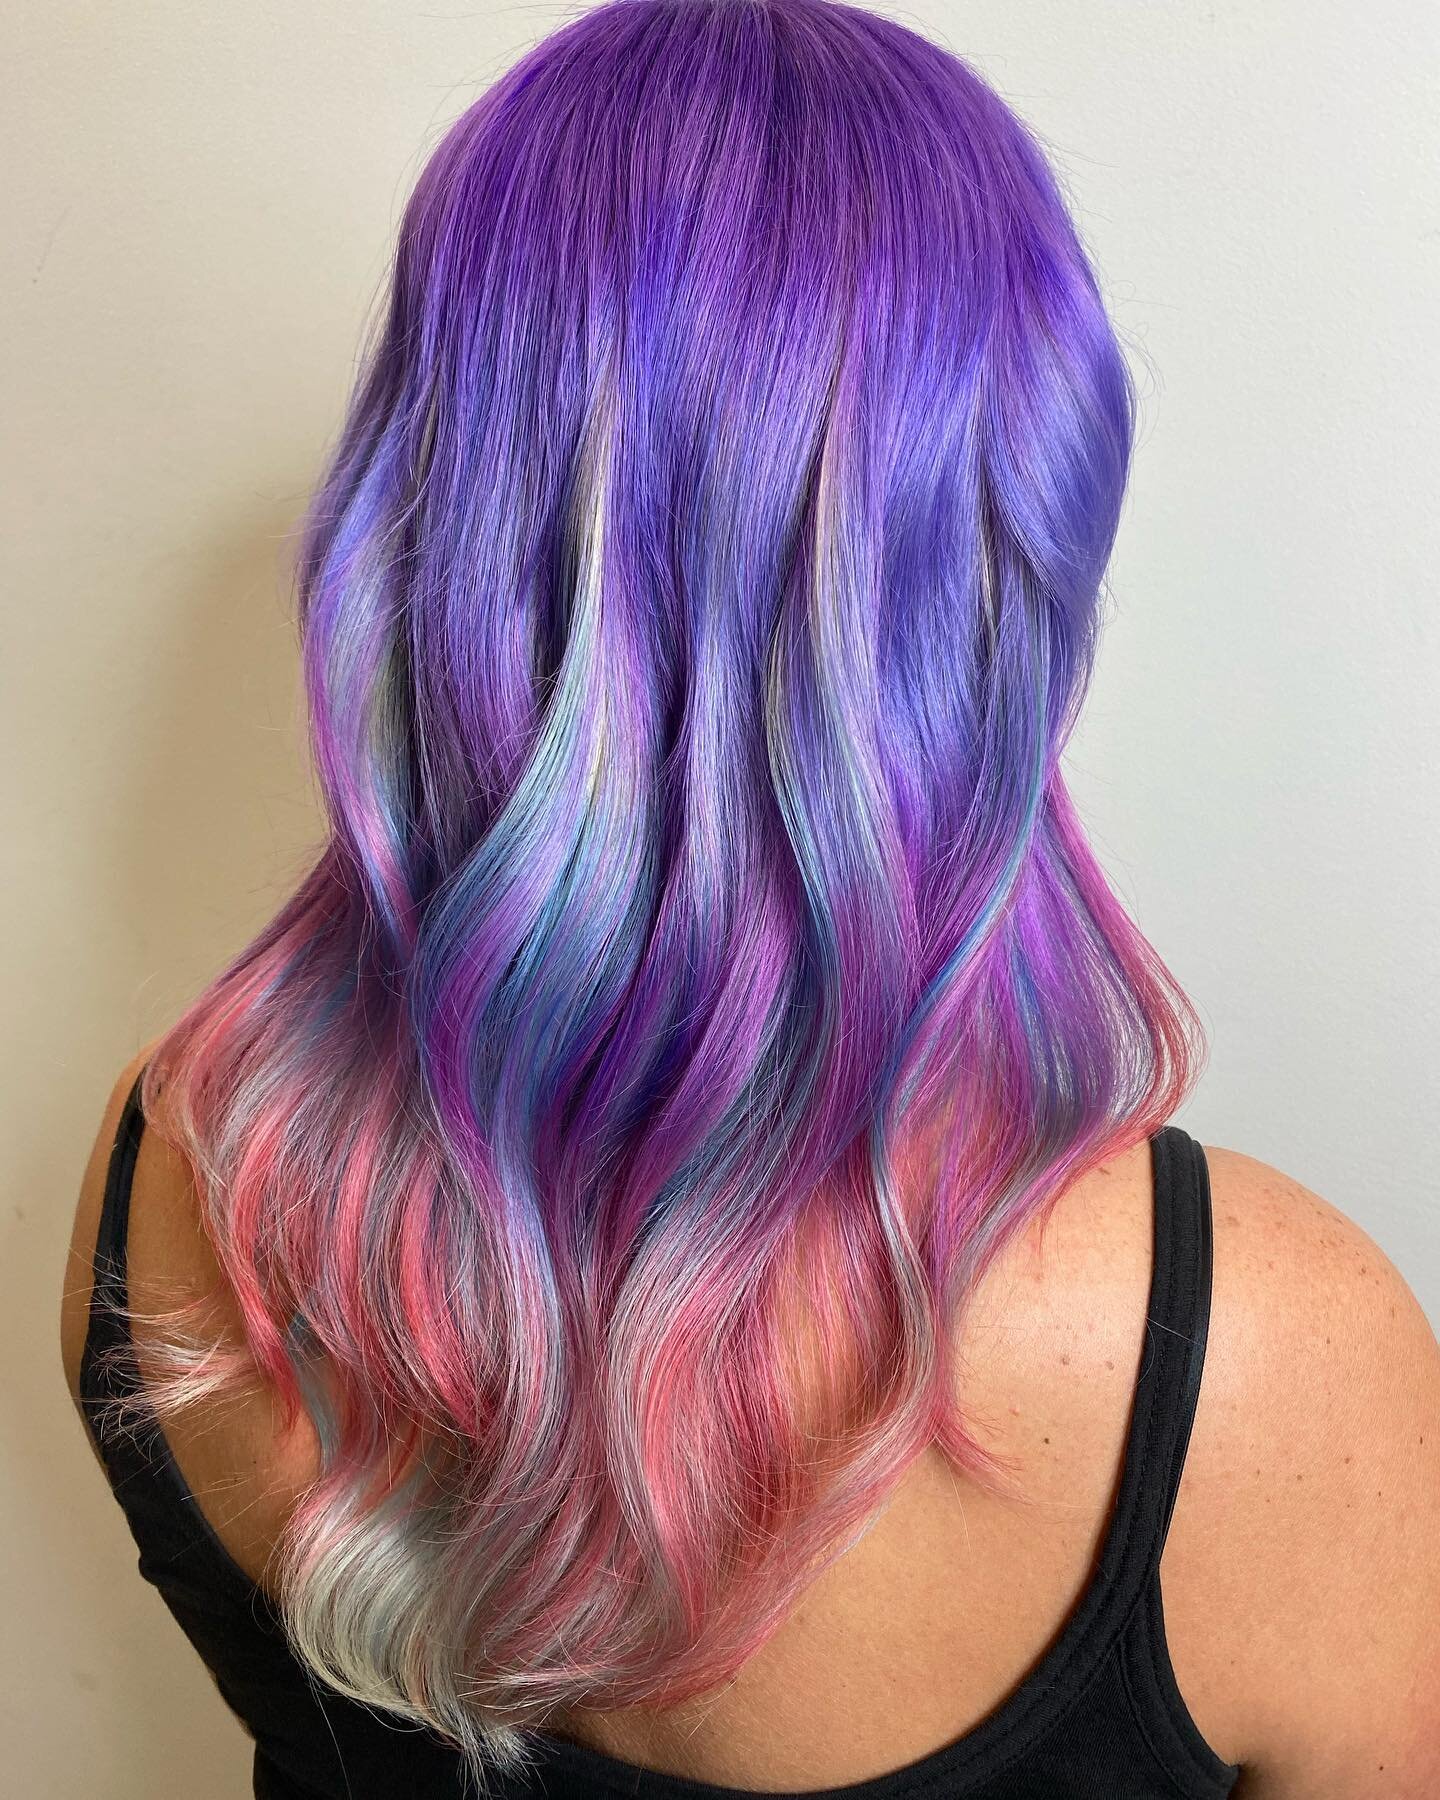 Inspired by the unusual color combinations of anything tie-dyed 😍 @reysalehair 
.
.
.
.
.
#wella #askforwella #wellahair #tiedyehair #fashioncolors #colorcreators #crafthaircolor #crafthairdresser #toronto #torontocolourist #torontosalons #torontoli